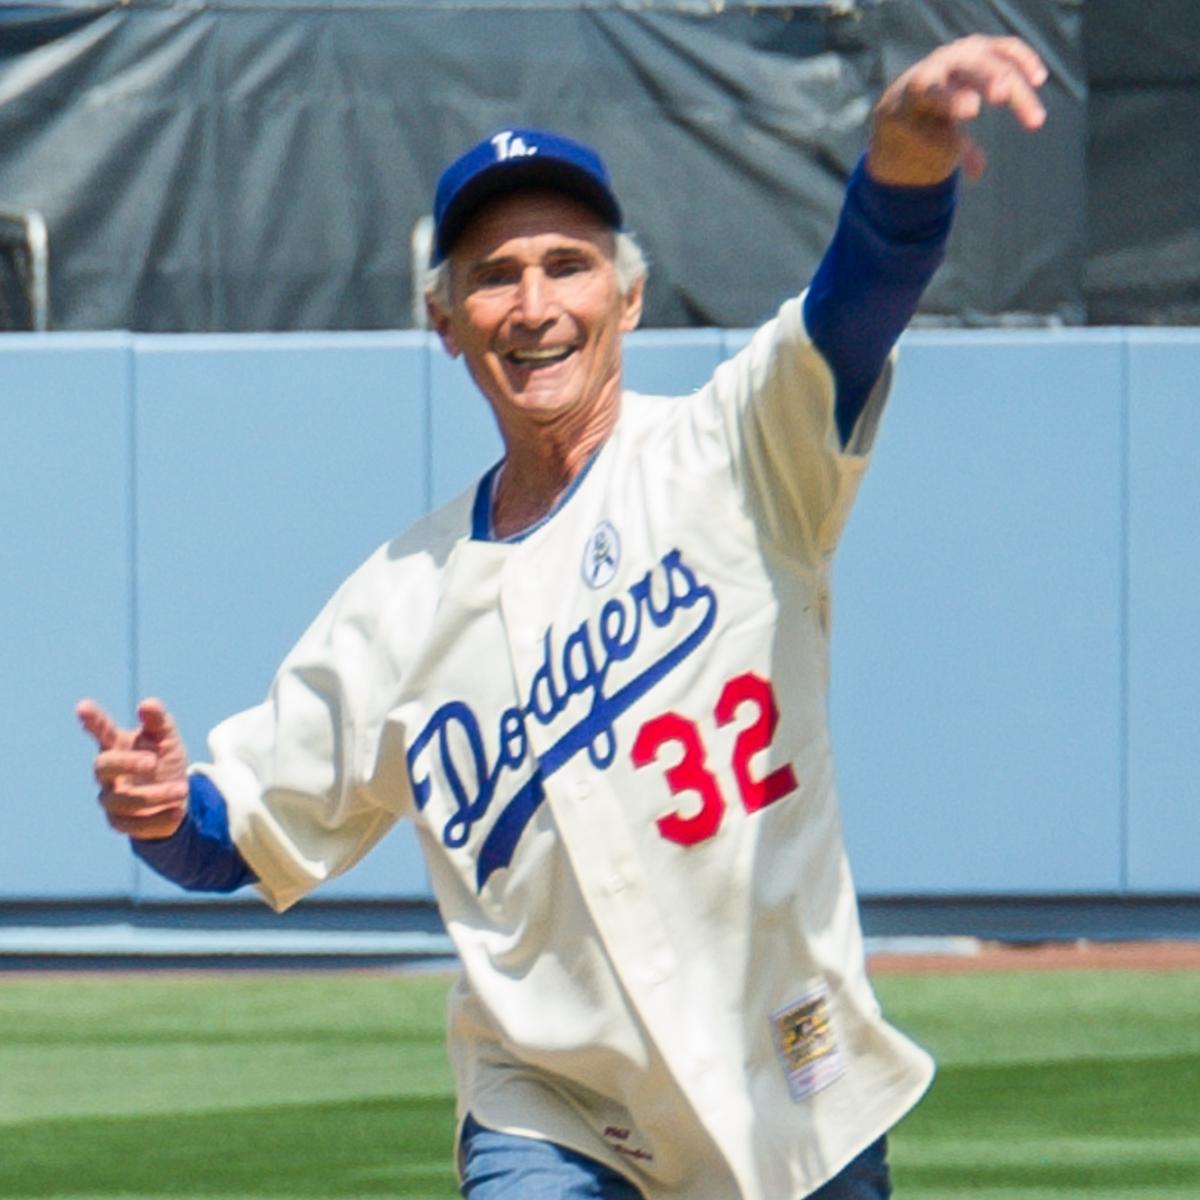 Sandy Koufax Game-Worn Jersey from 1963 Season Sells for $429,000